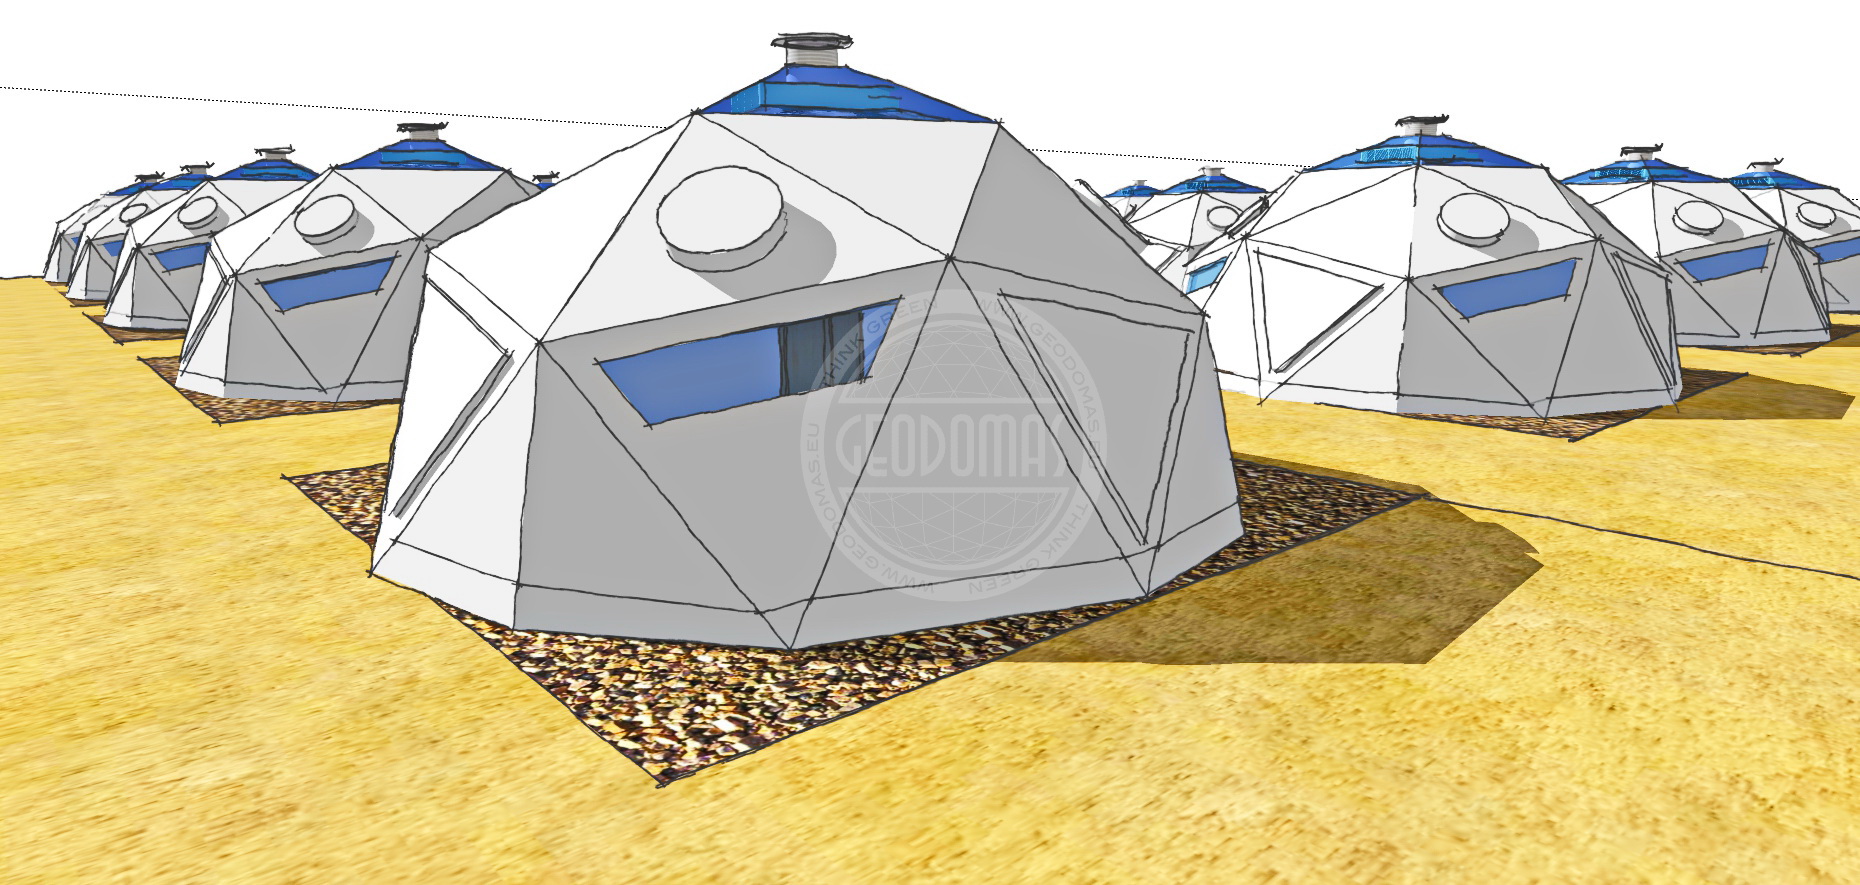 Domes for Temporary Camp Facilities Ø6m x 4person